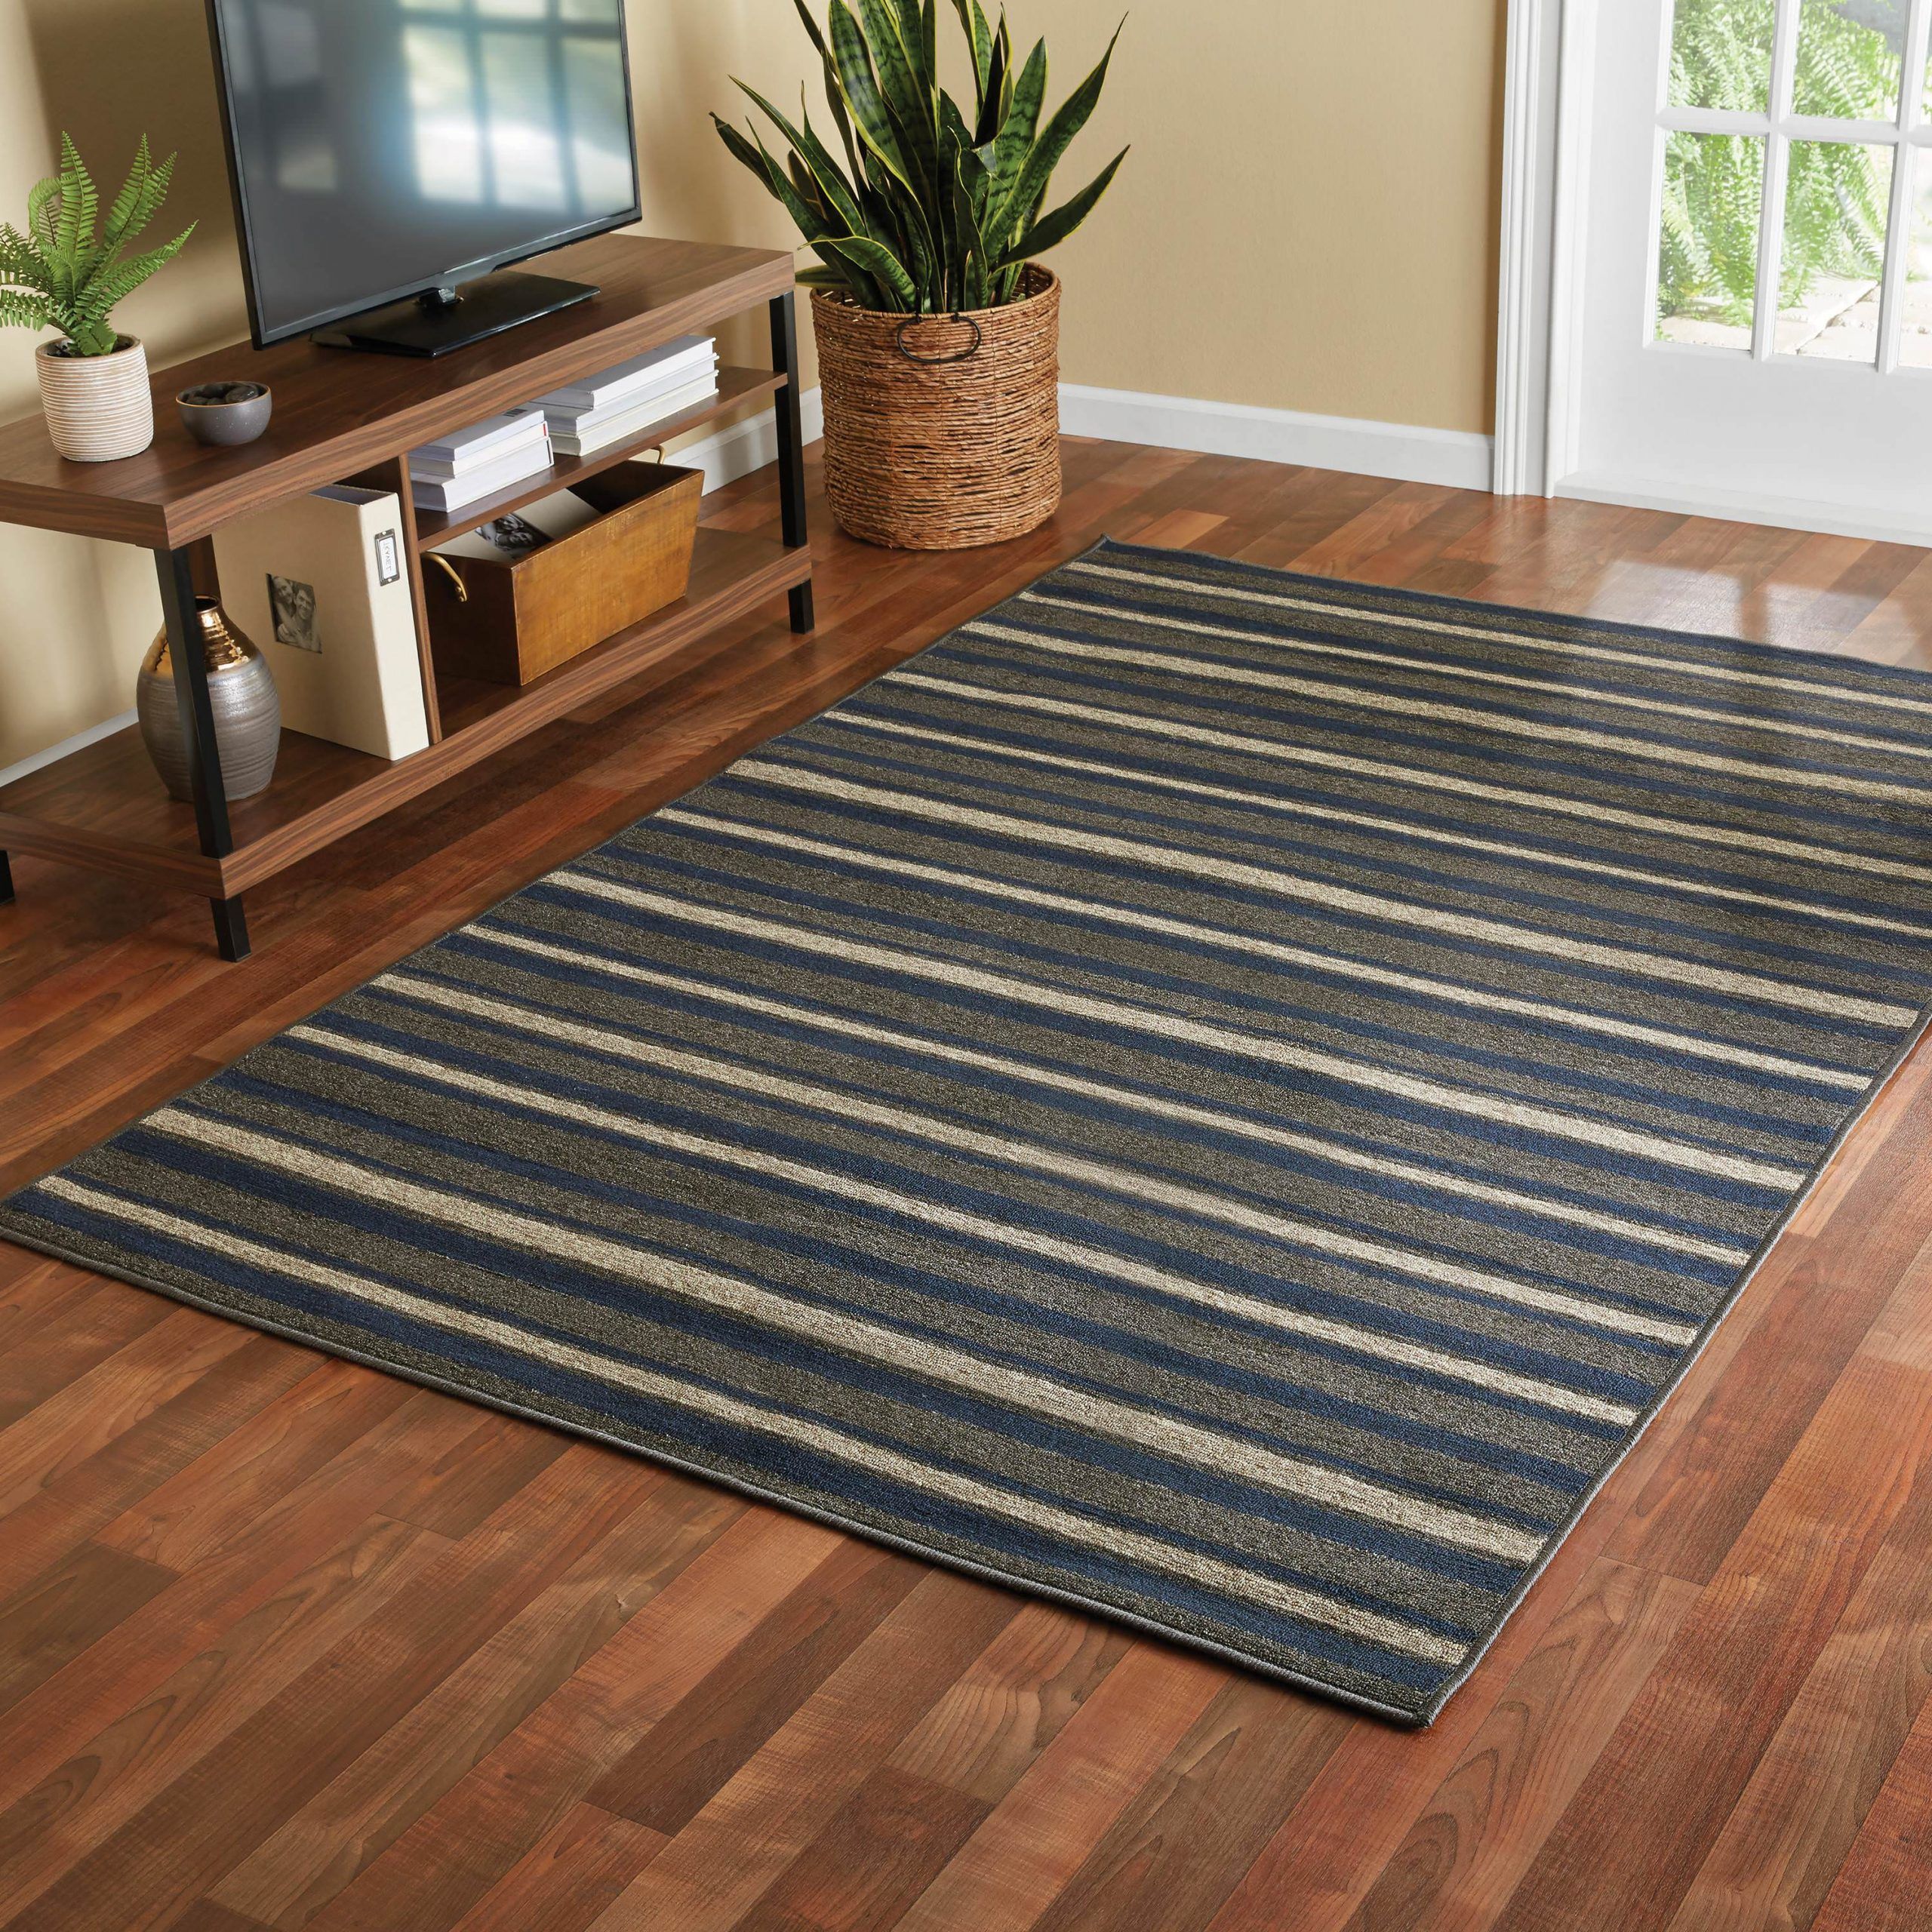 Fashionable Mainstays Sonata Striped Indoor Living Room Area Rug, Navy Blue And For Navy Blue And White Striped Ottomans (View 5 of 10)